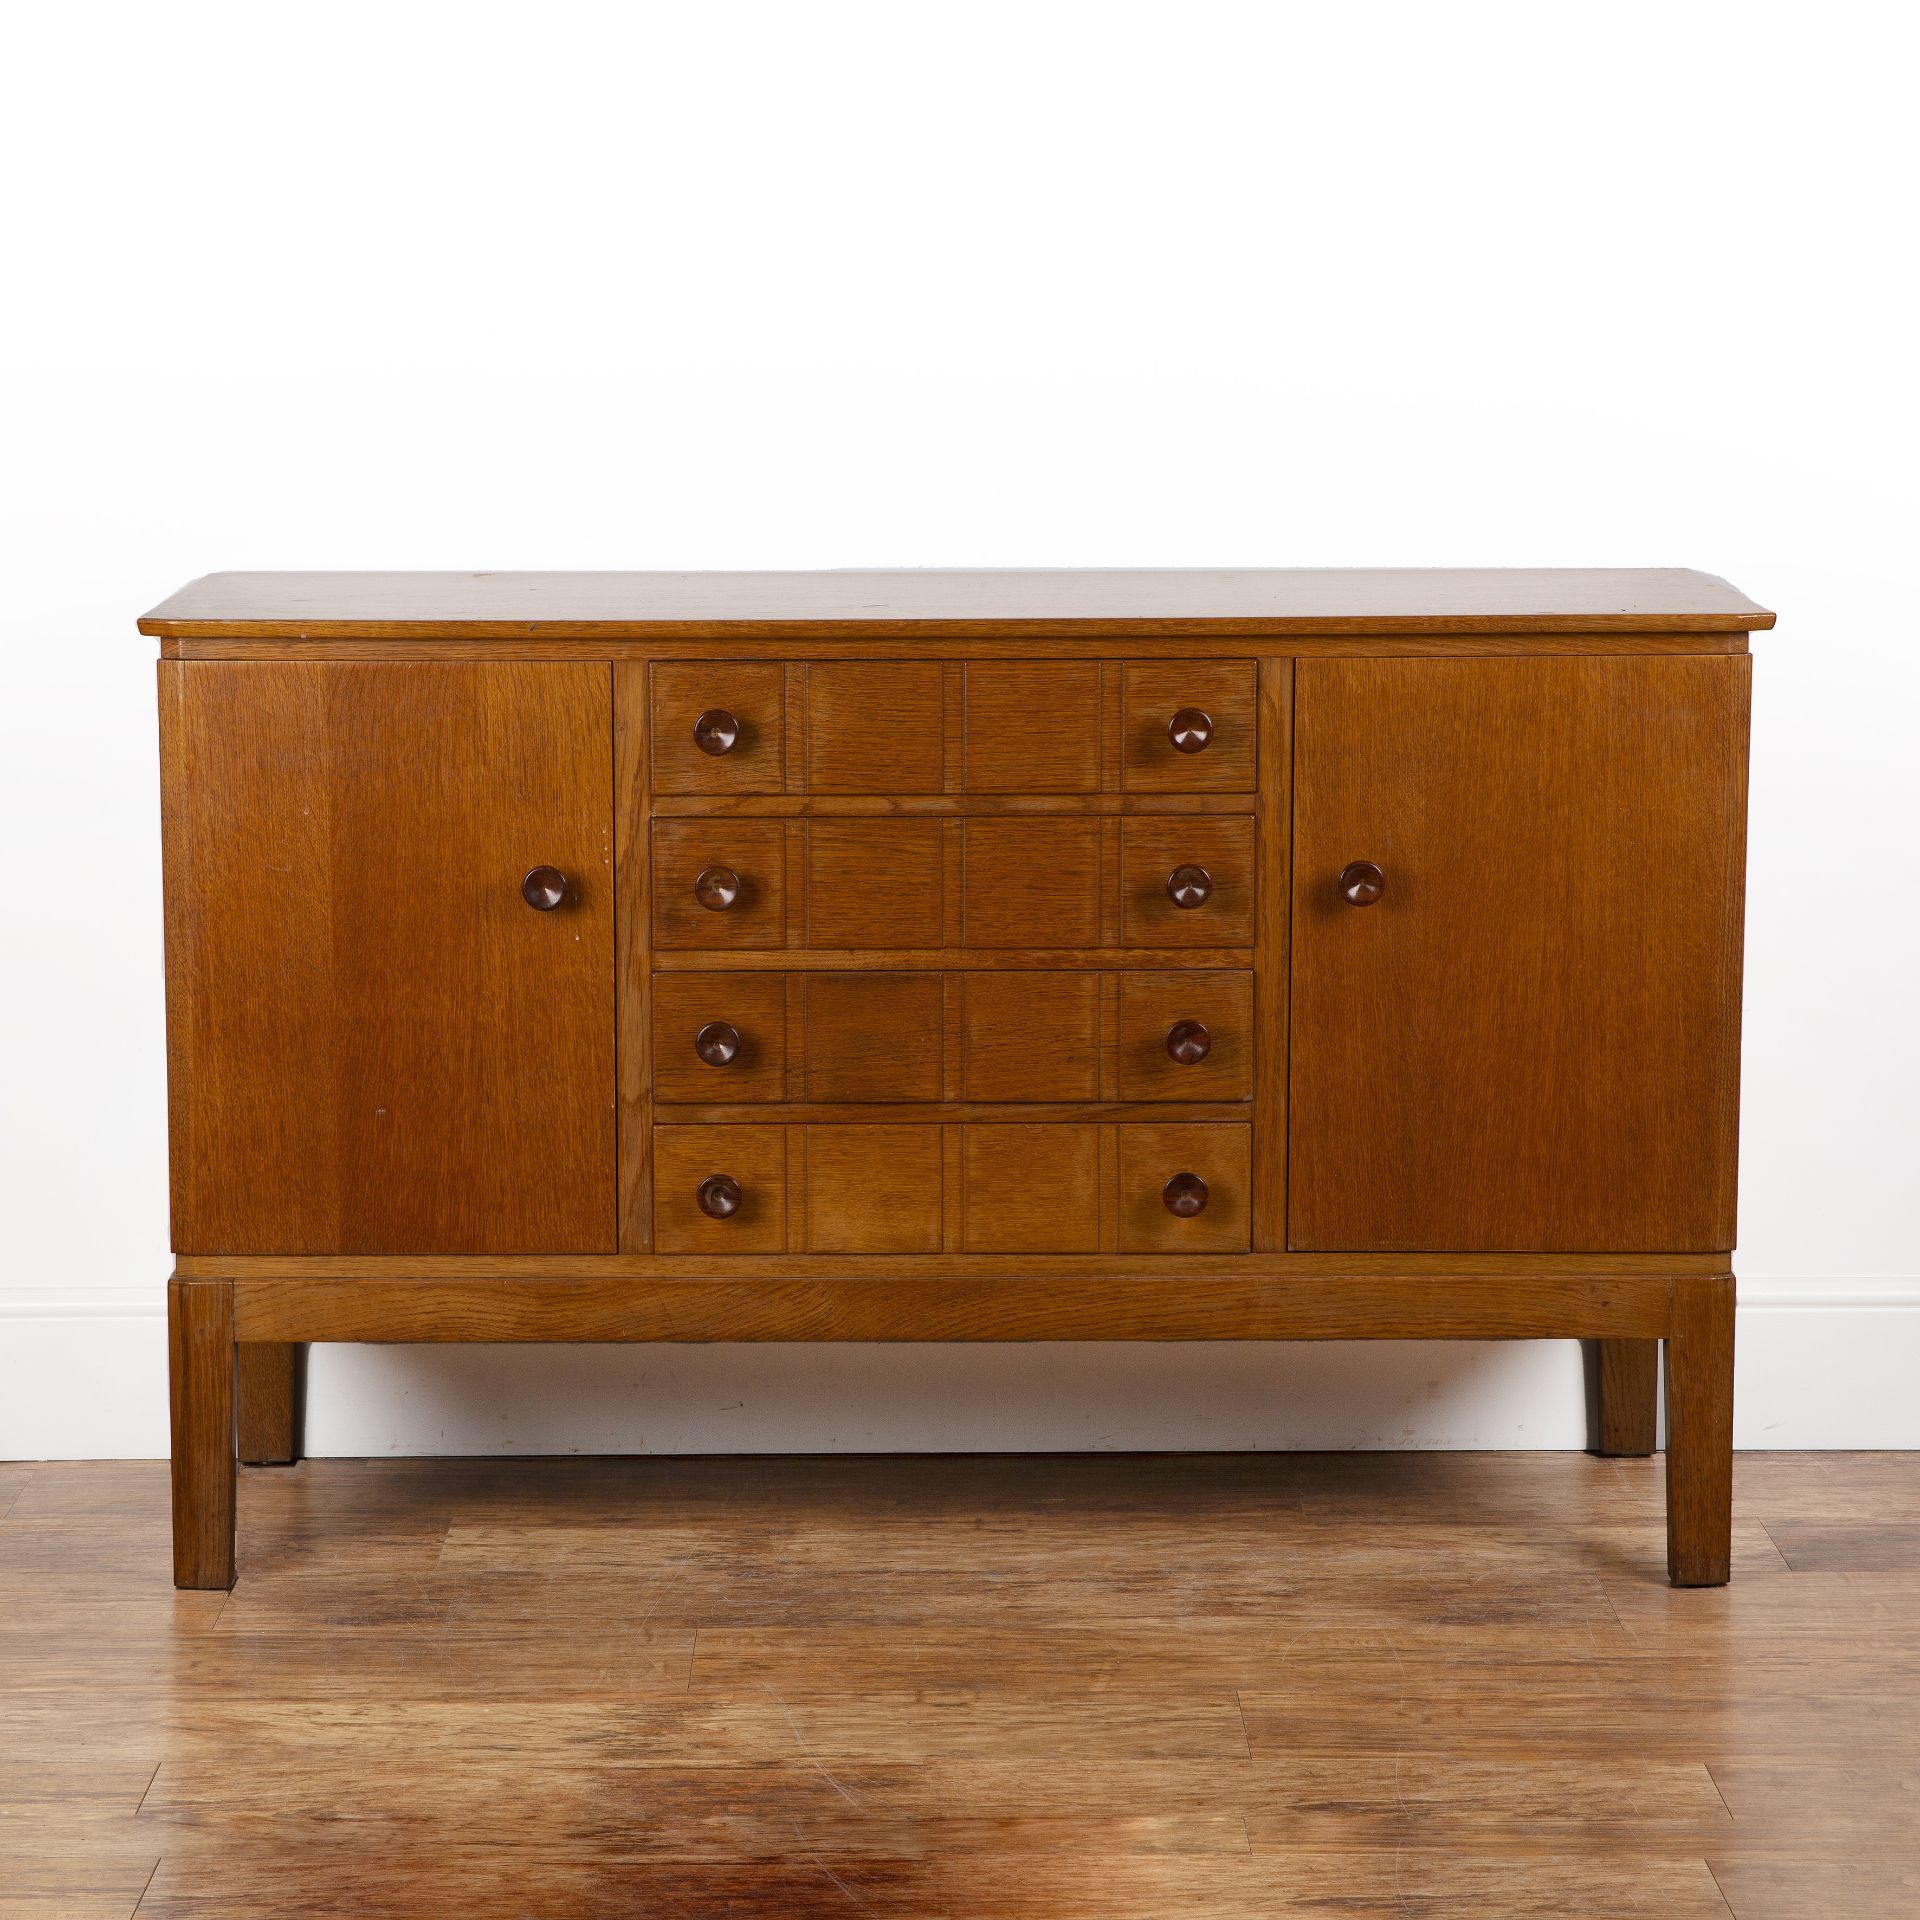 Gordon Russell (1892-1980) oak, Utility sideboard, with four central drawers flanked on each side by